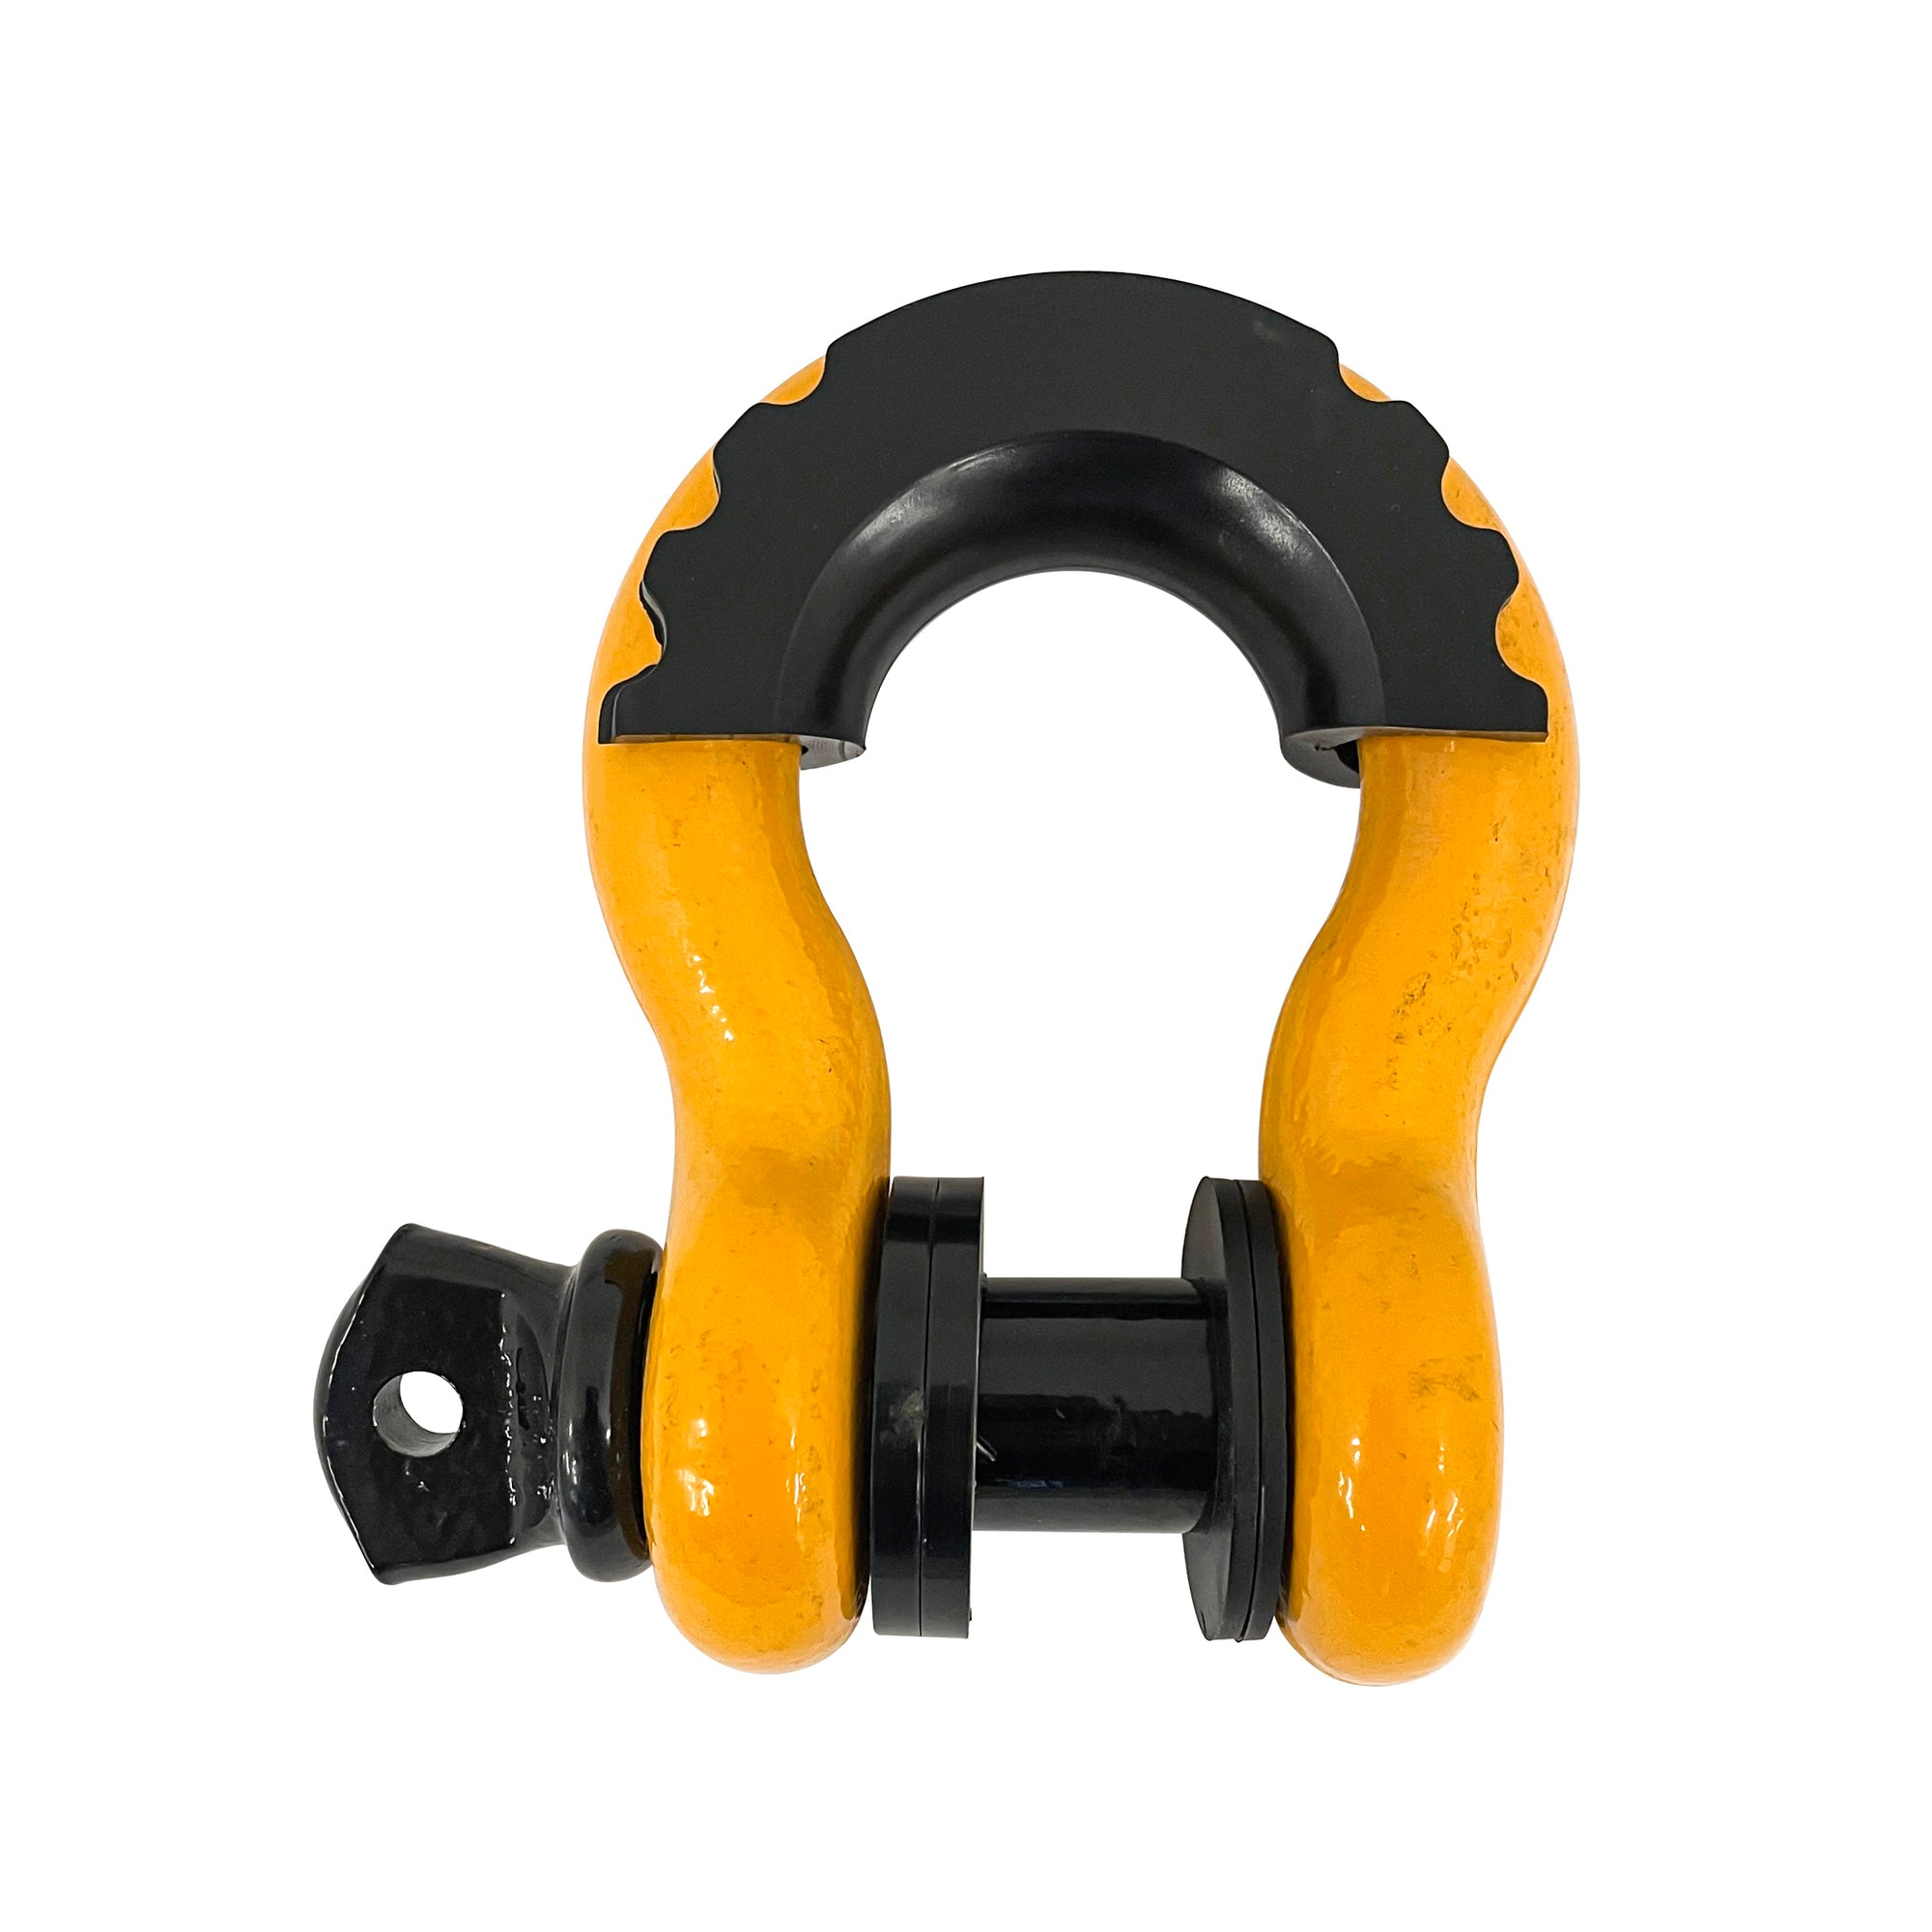 Sherpa recovery bow shackle